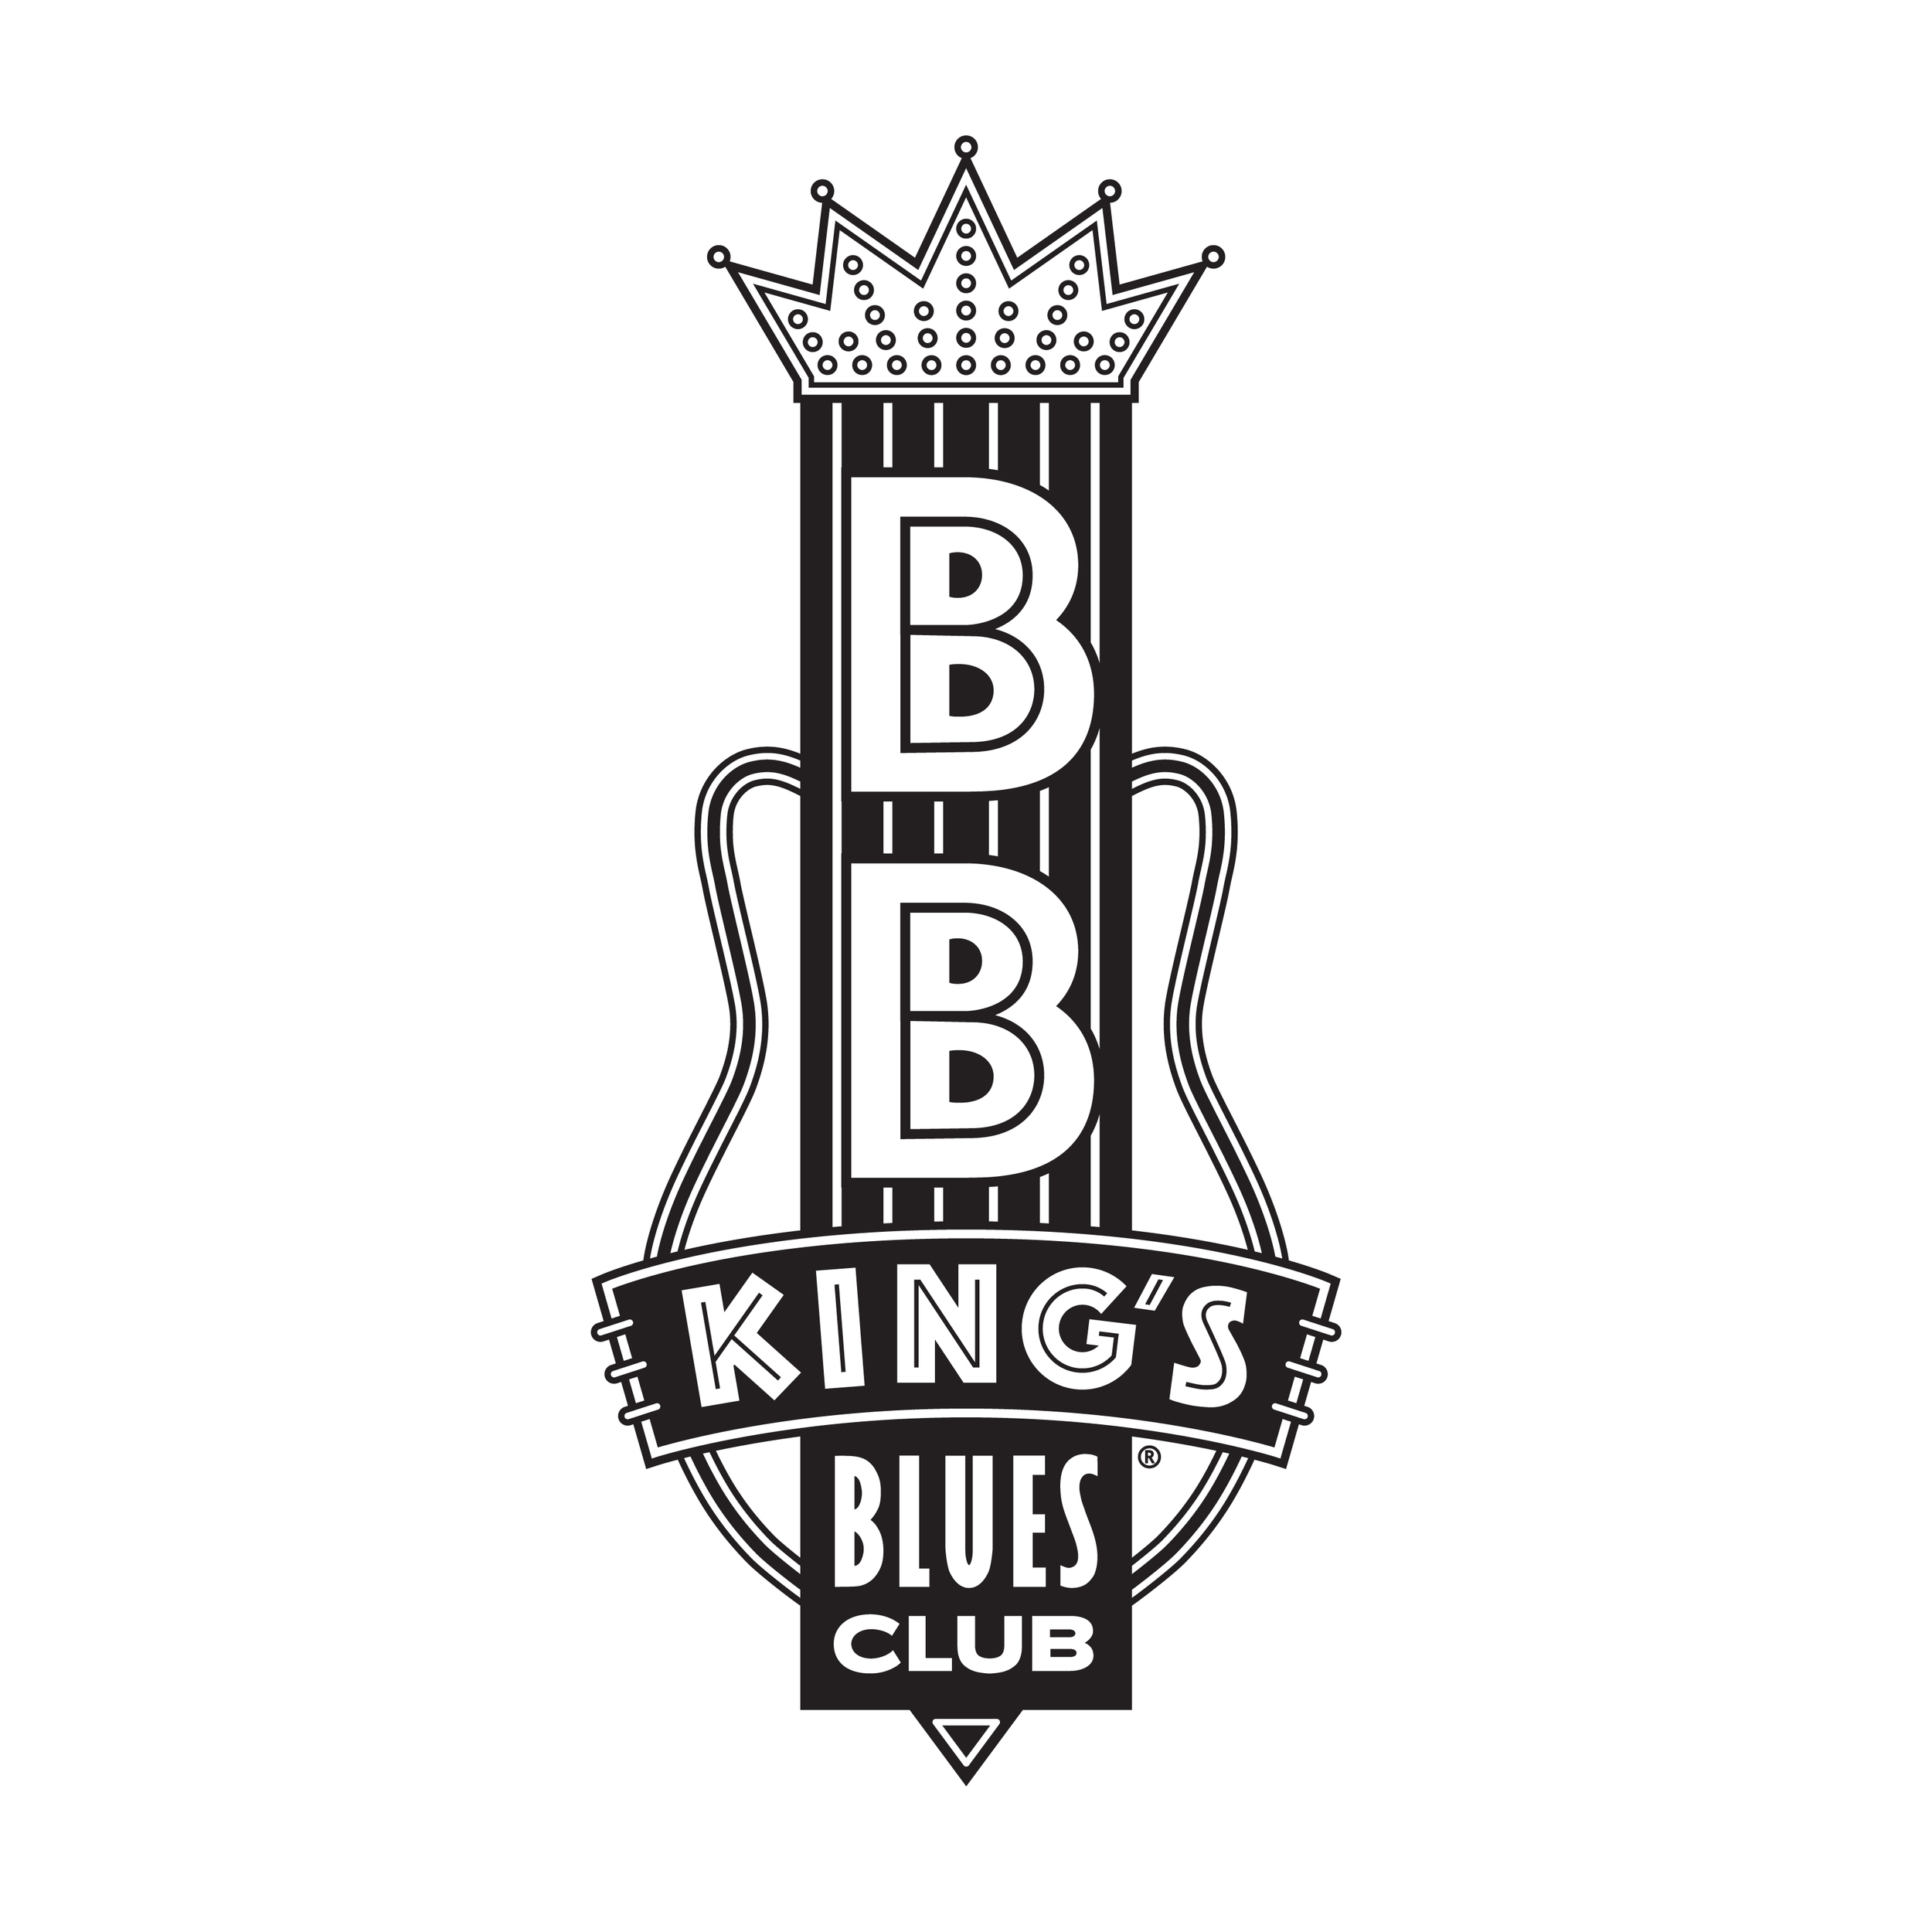  BB King’s Blues Club logo  Branding creative and design by Chuck Mitchell  Production design by Beth Mitchell  Beale Street Memphis, TN 